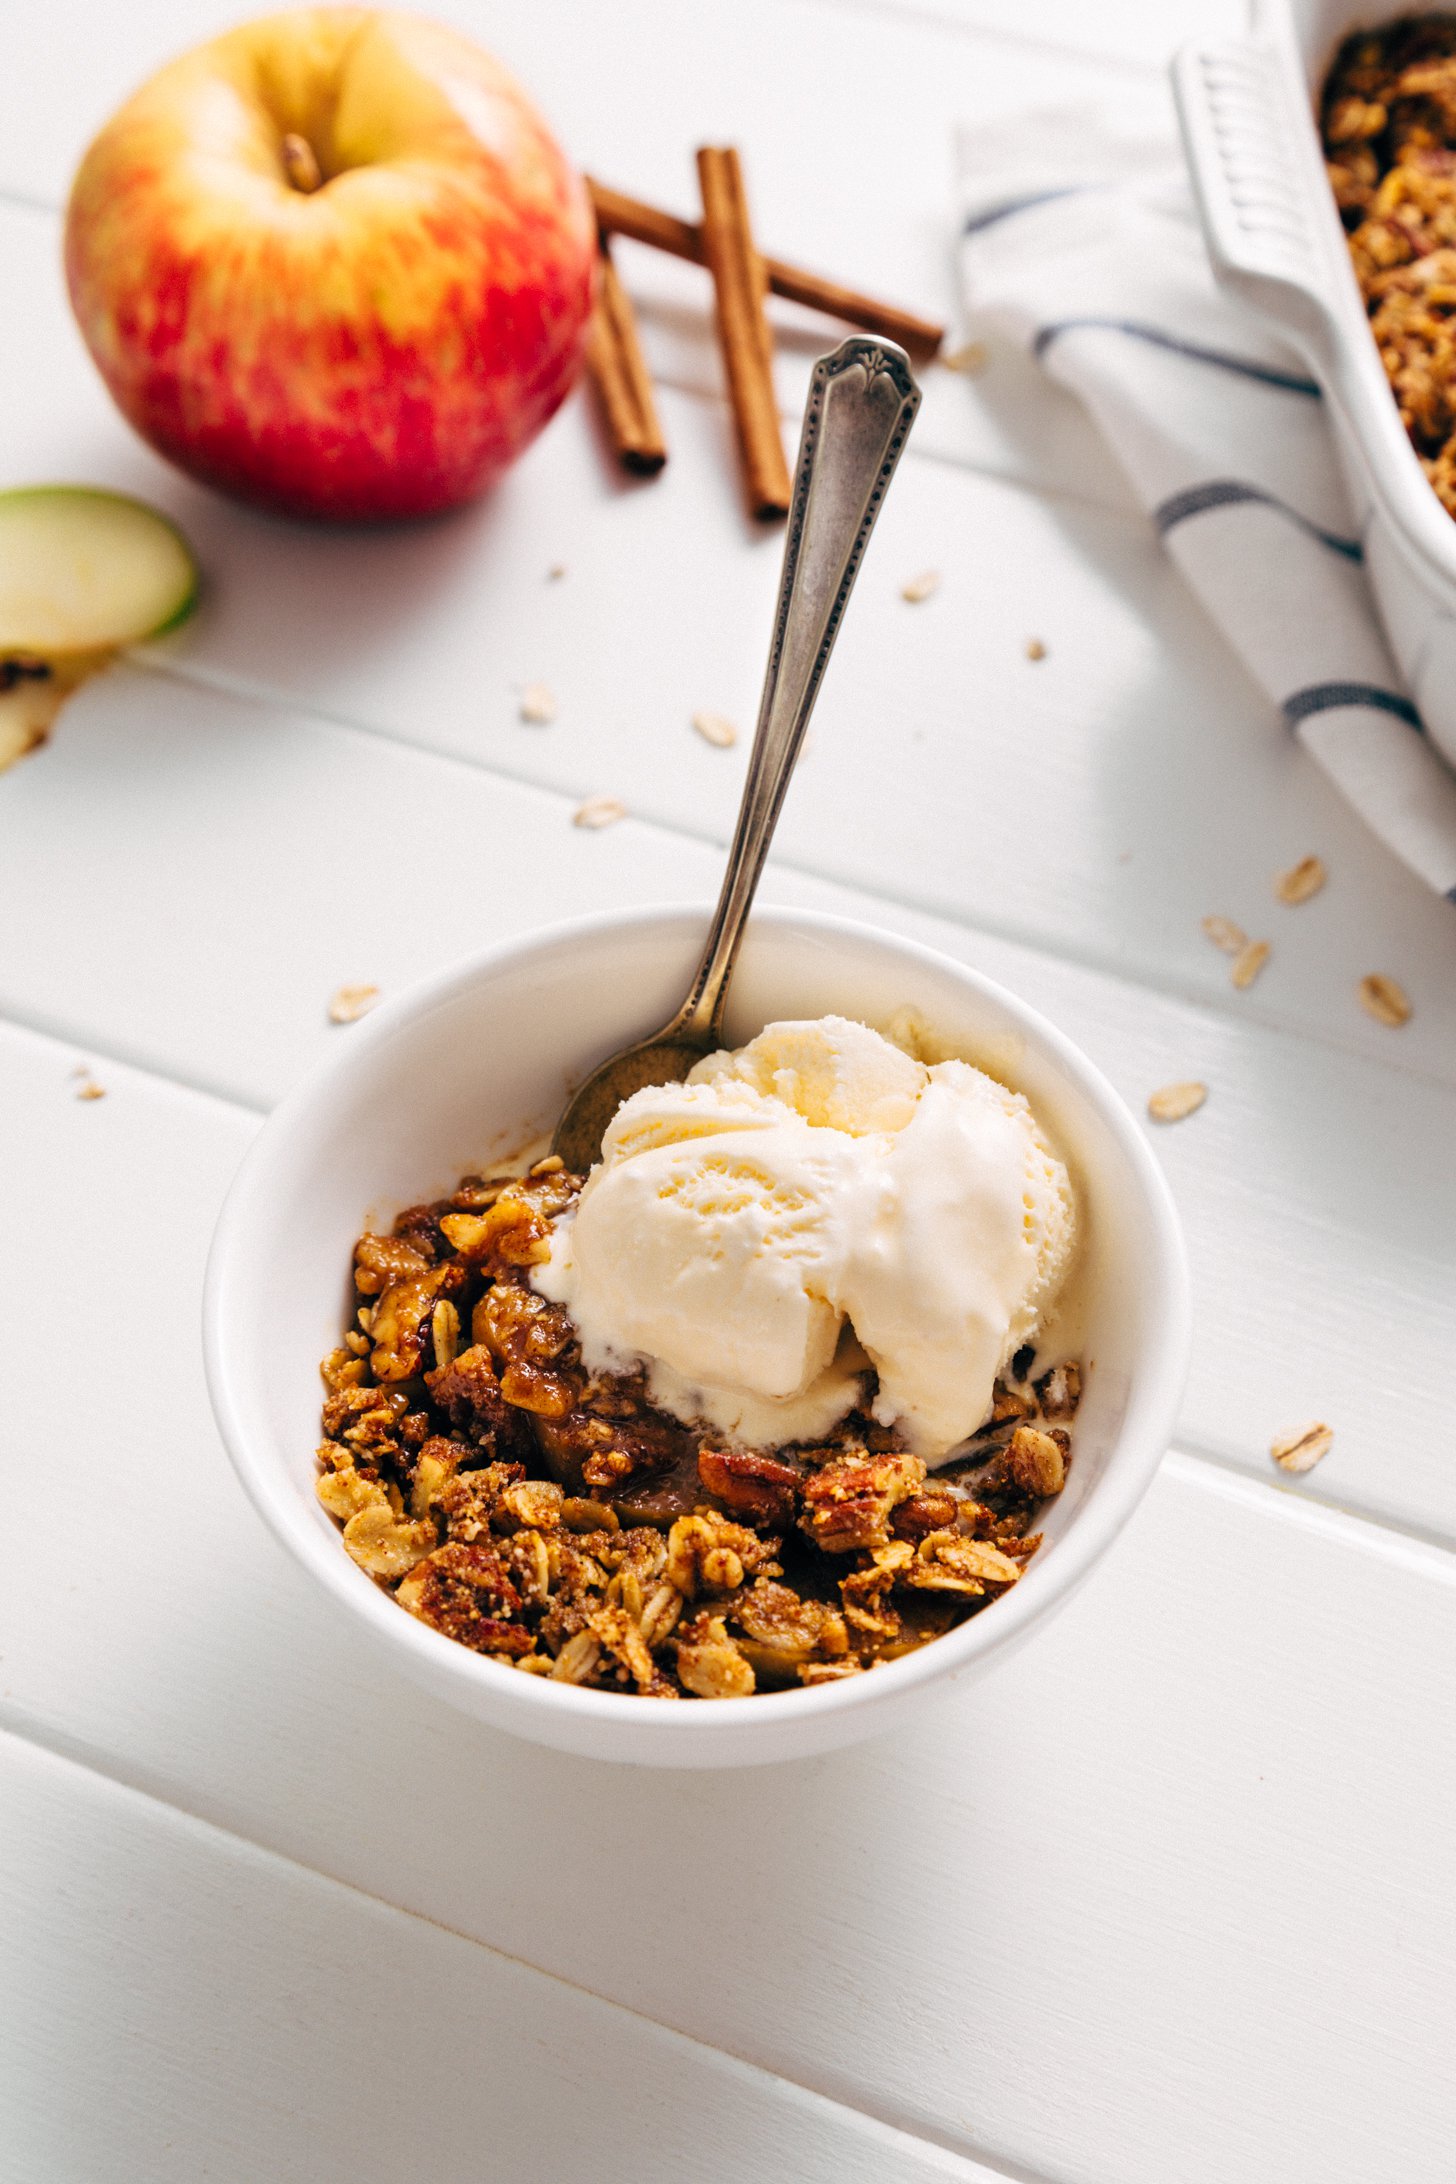 Spoon in a bowl of healthy Apple Crisp with a scoop of vanilla ice cream